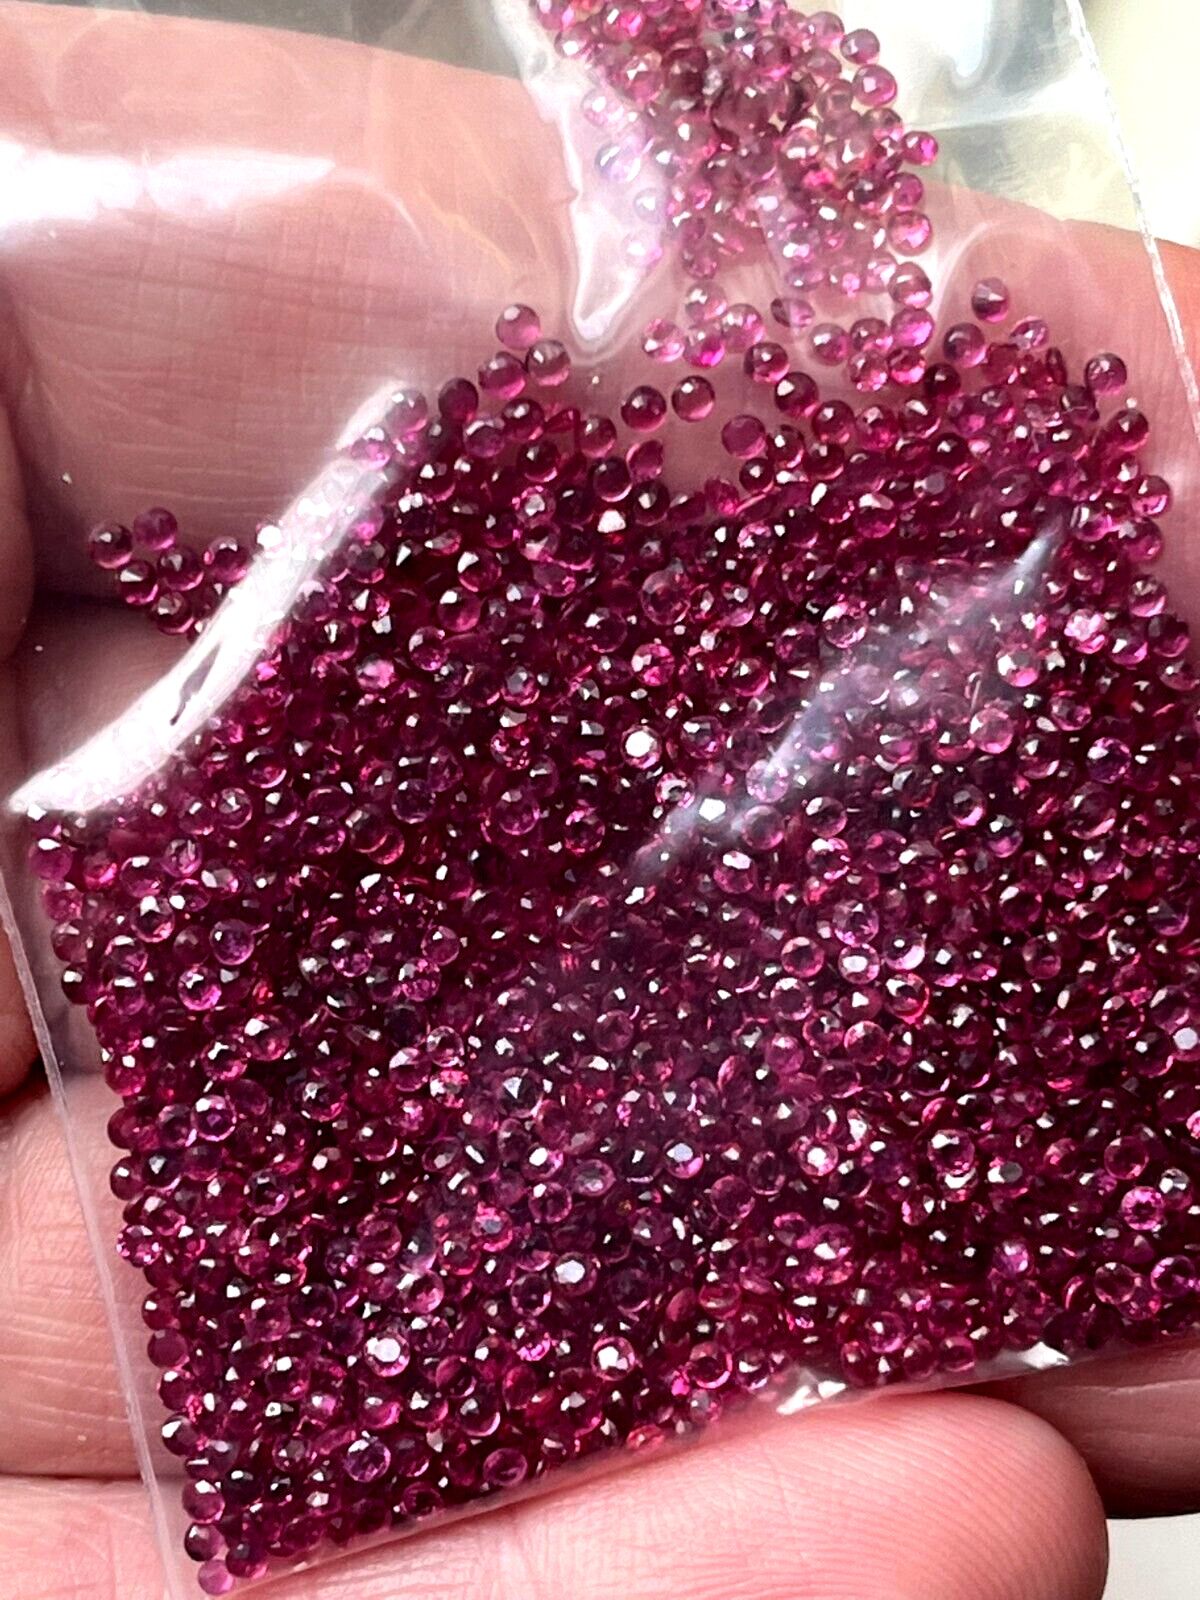 1ct Lot High Grade Genuine Rubies. THESE ARE VERY NICE *RETIRING FROM EBAY*.